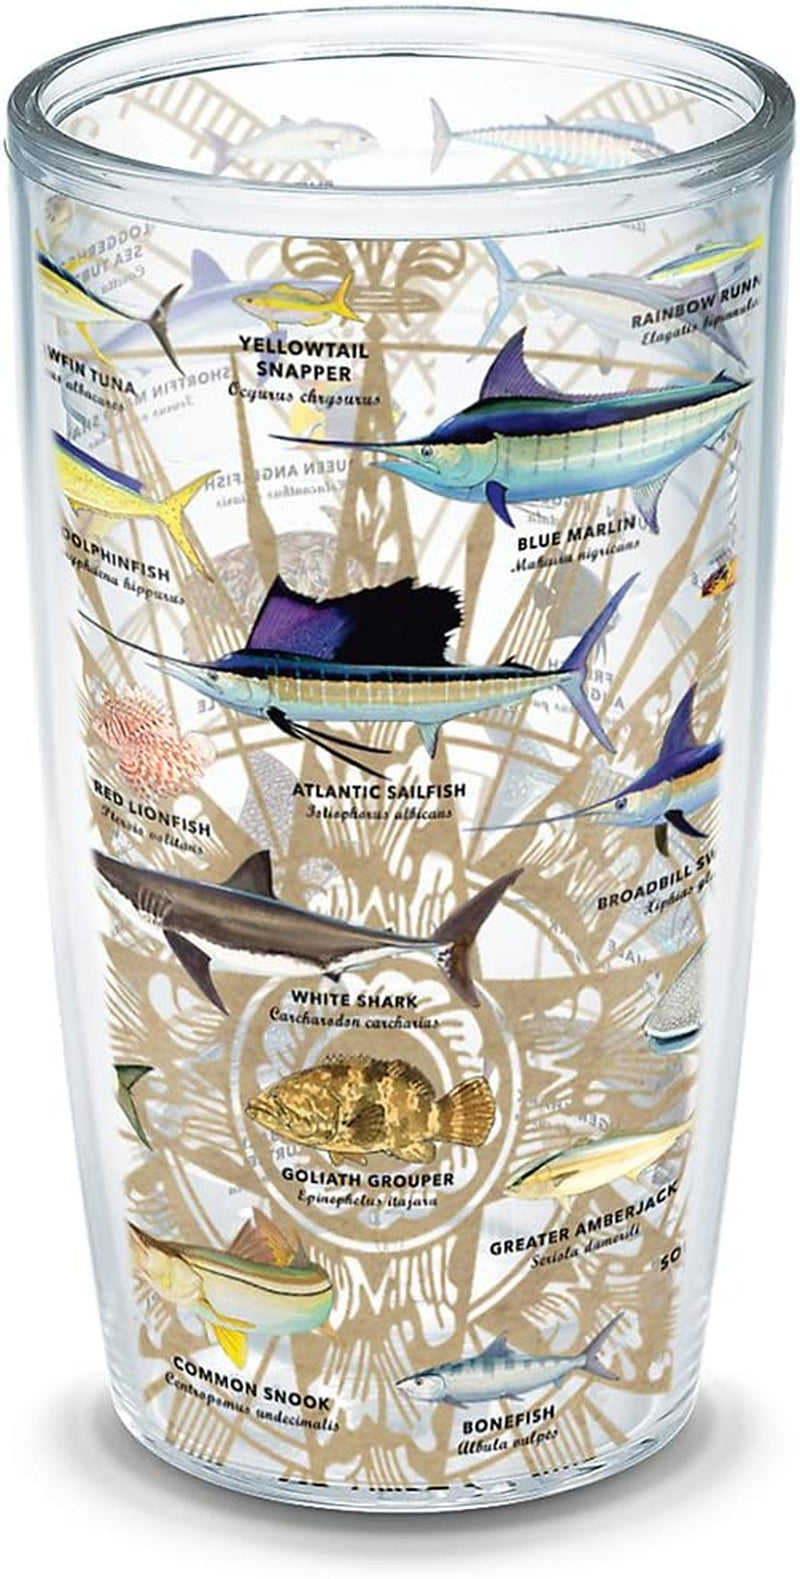 Tervis Made in USA Double Walled Guy Harvey Insulated Tumbler Cup Keeps Drinks Cold & Hot, 16Oz Mug - No Lid, Charts